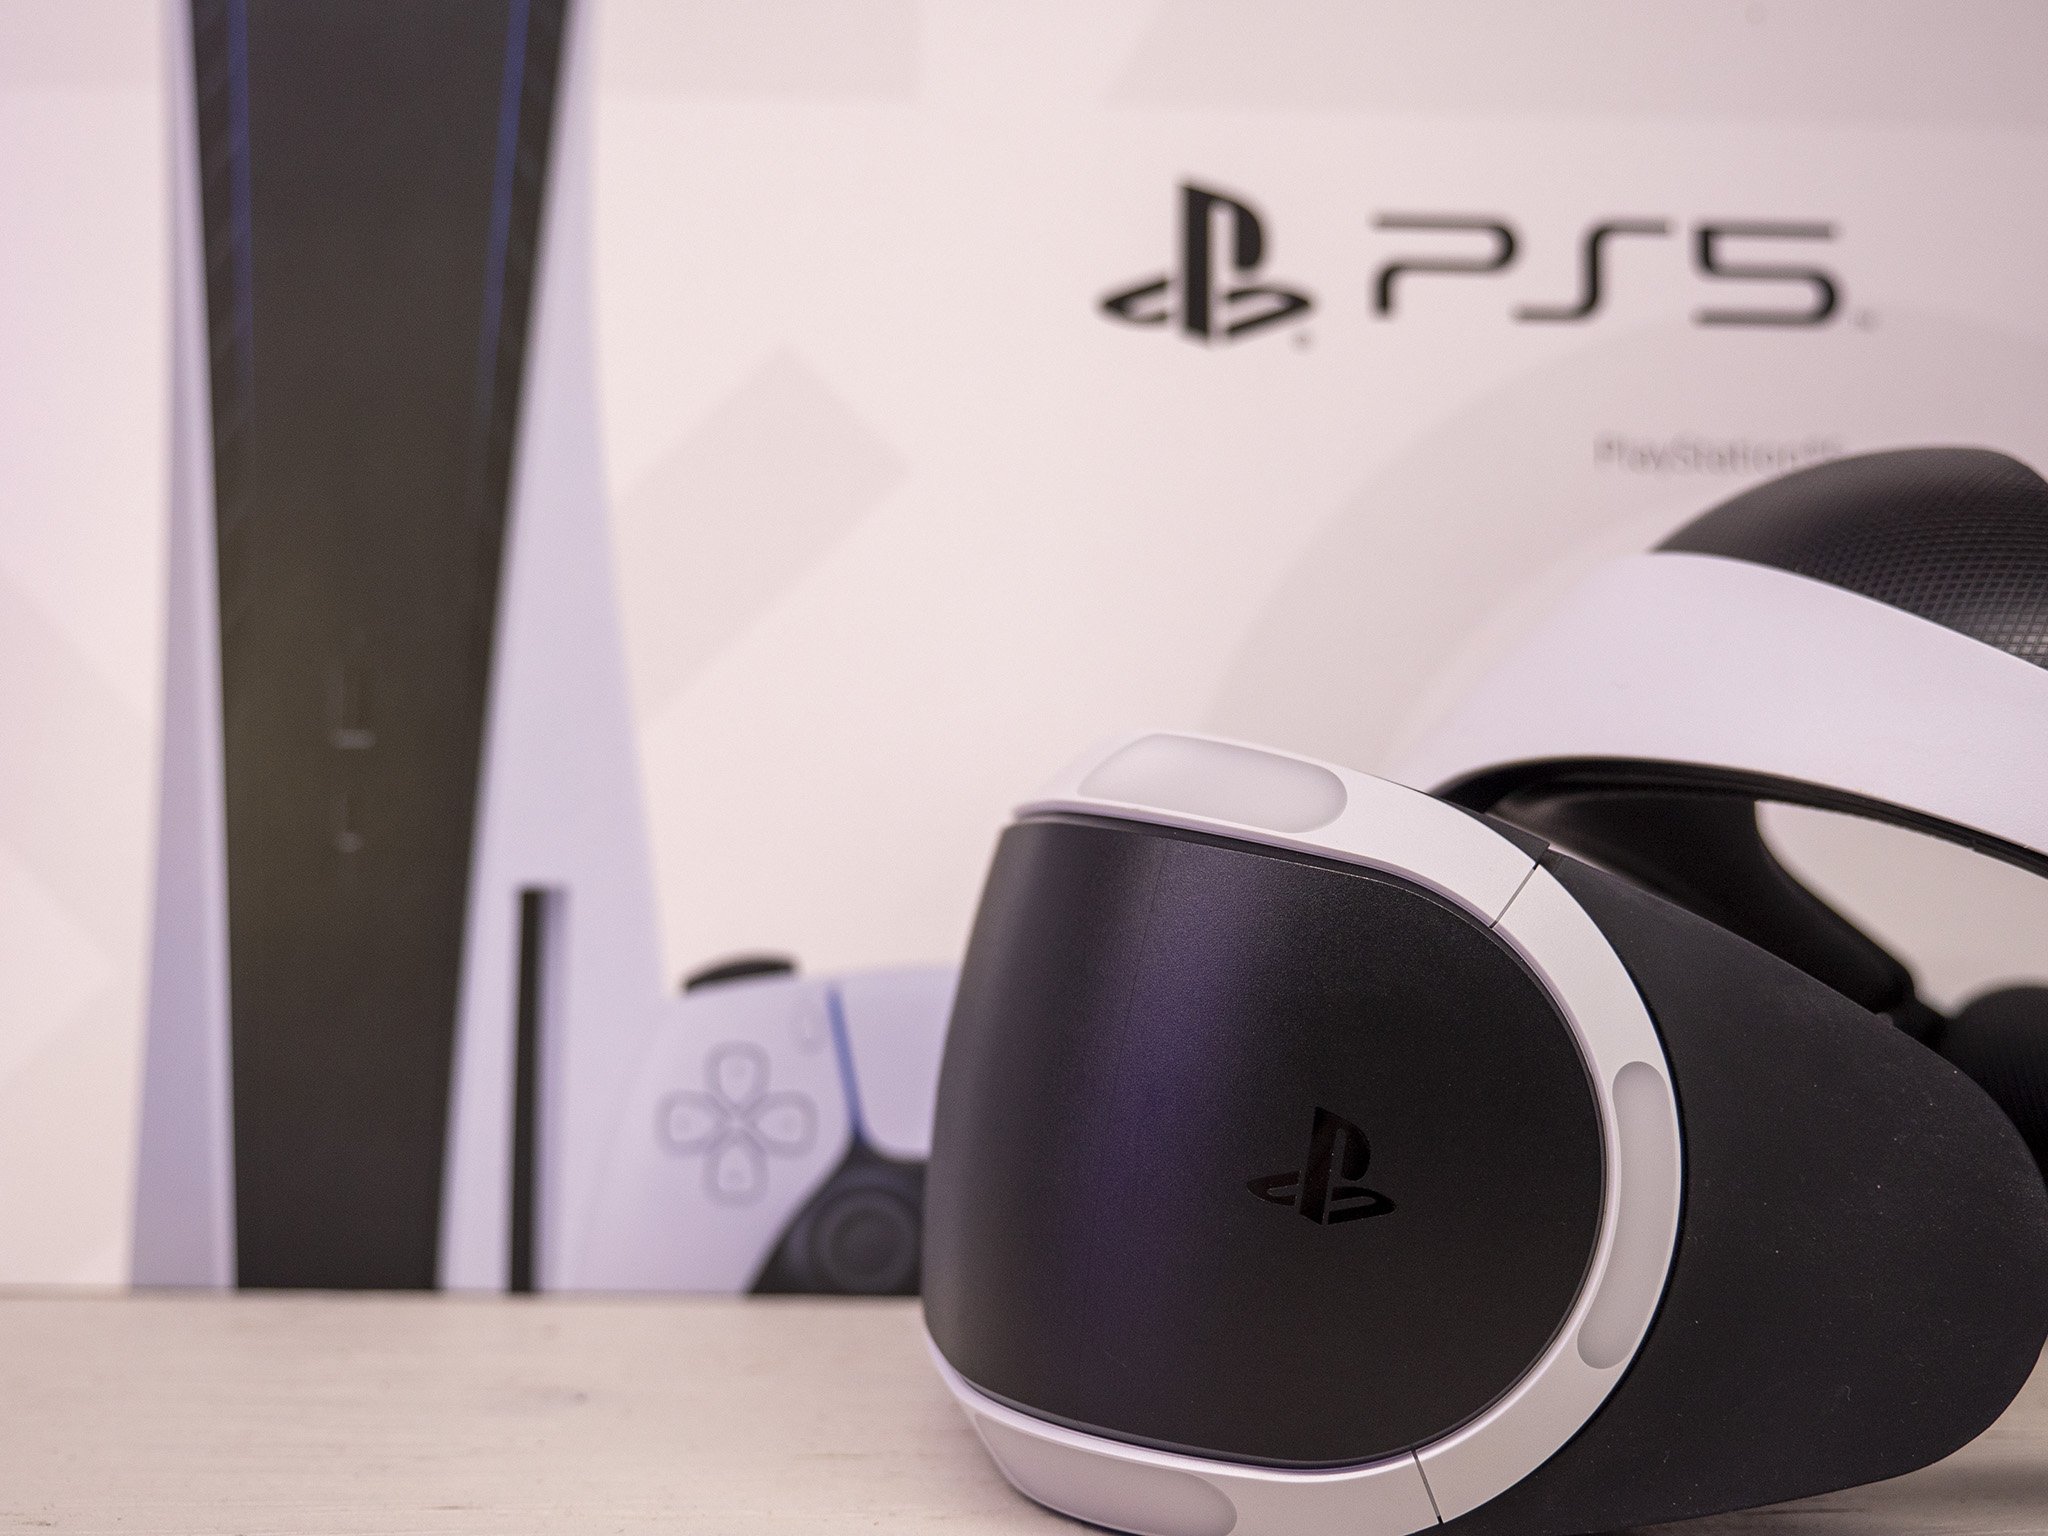 PS5 Pro rumors: A boon for PSVR 2?